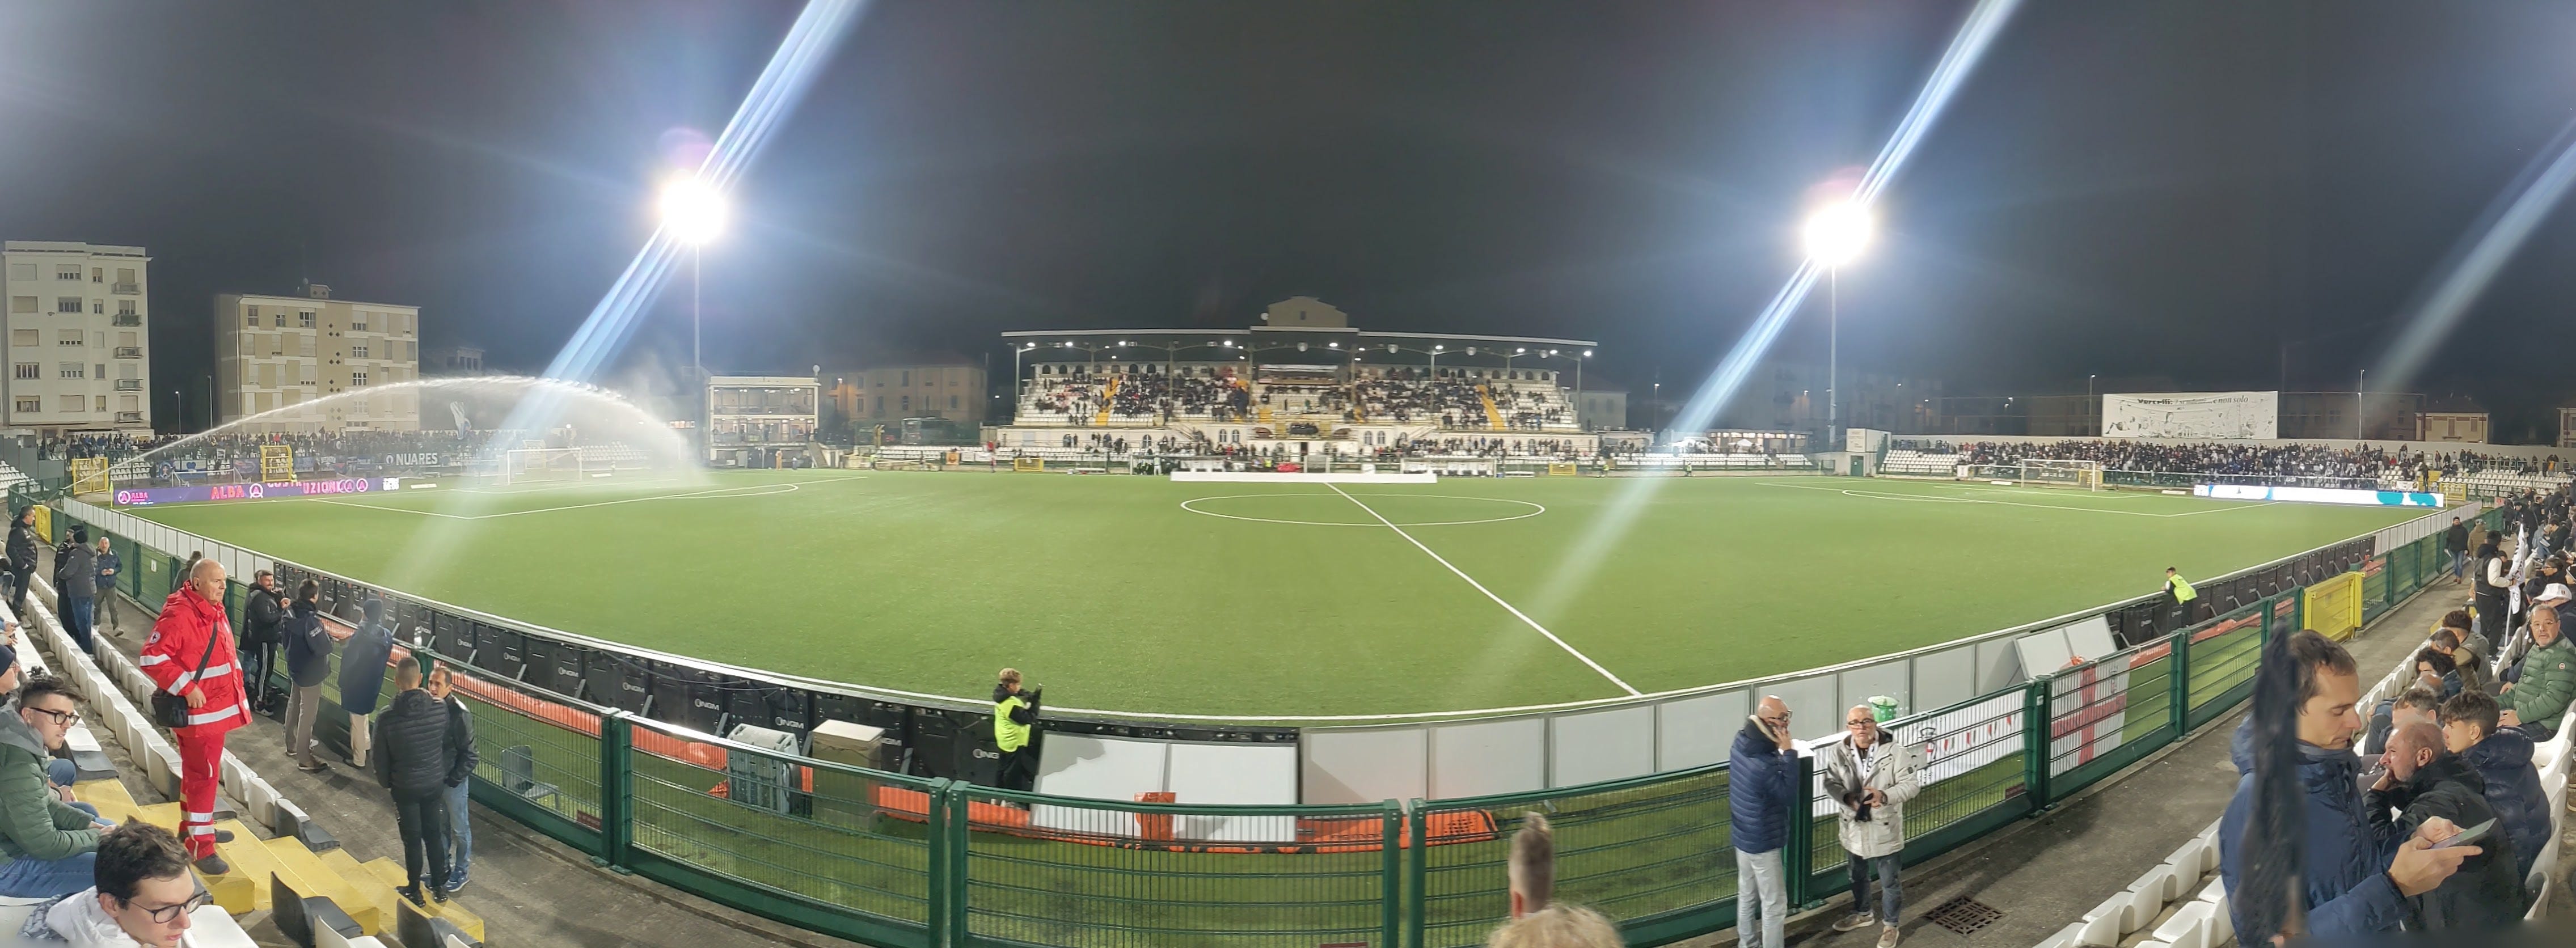 An image of a football stadium in the city of Vercelli which can be found in the north of Italy